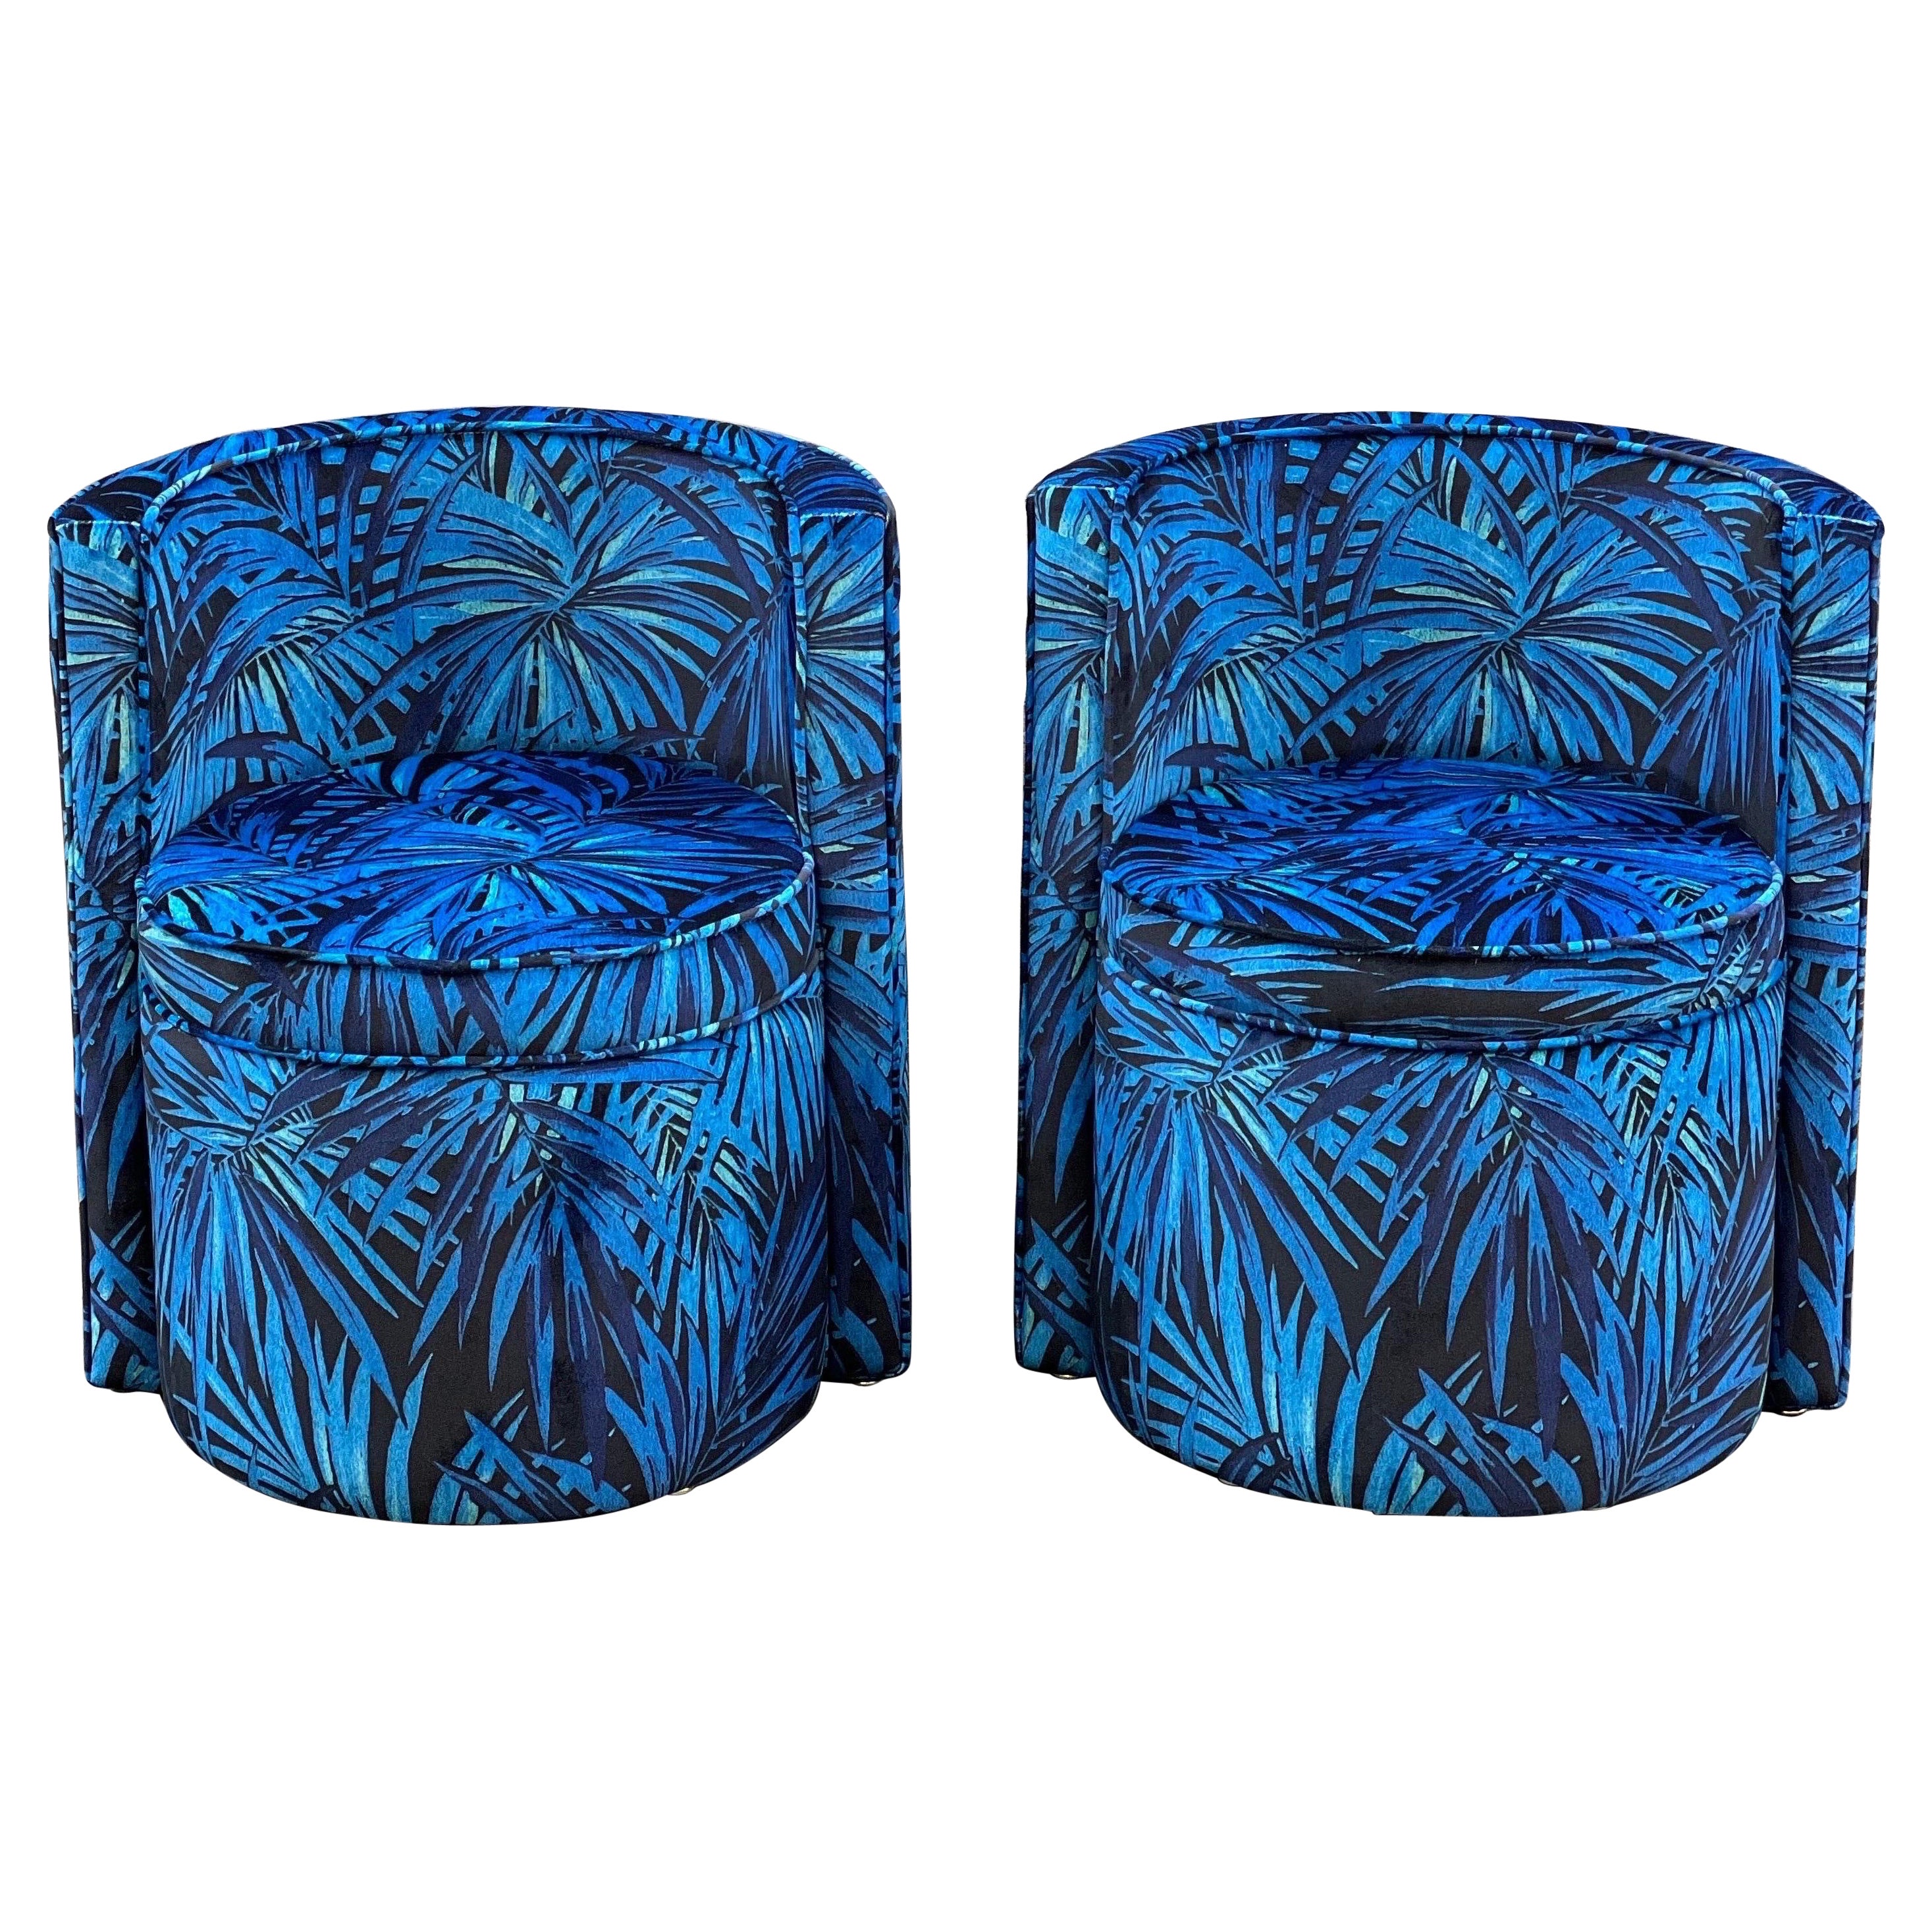 Pair of Upholstered  Armchairs  with Floral Velvet in Shades of Blue  1980 For Sale